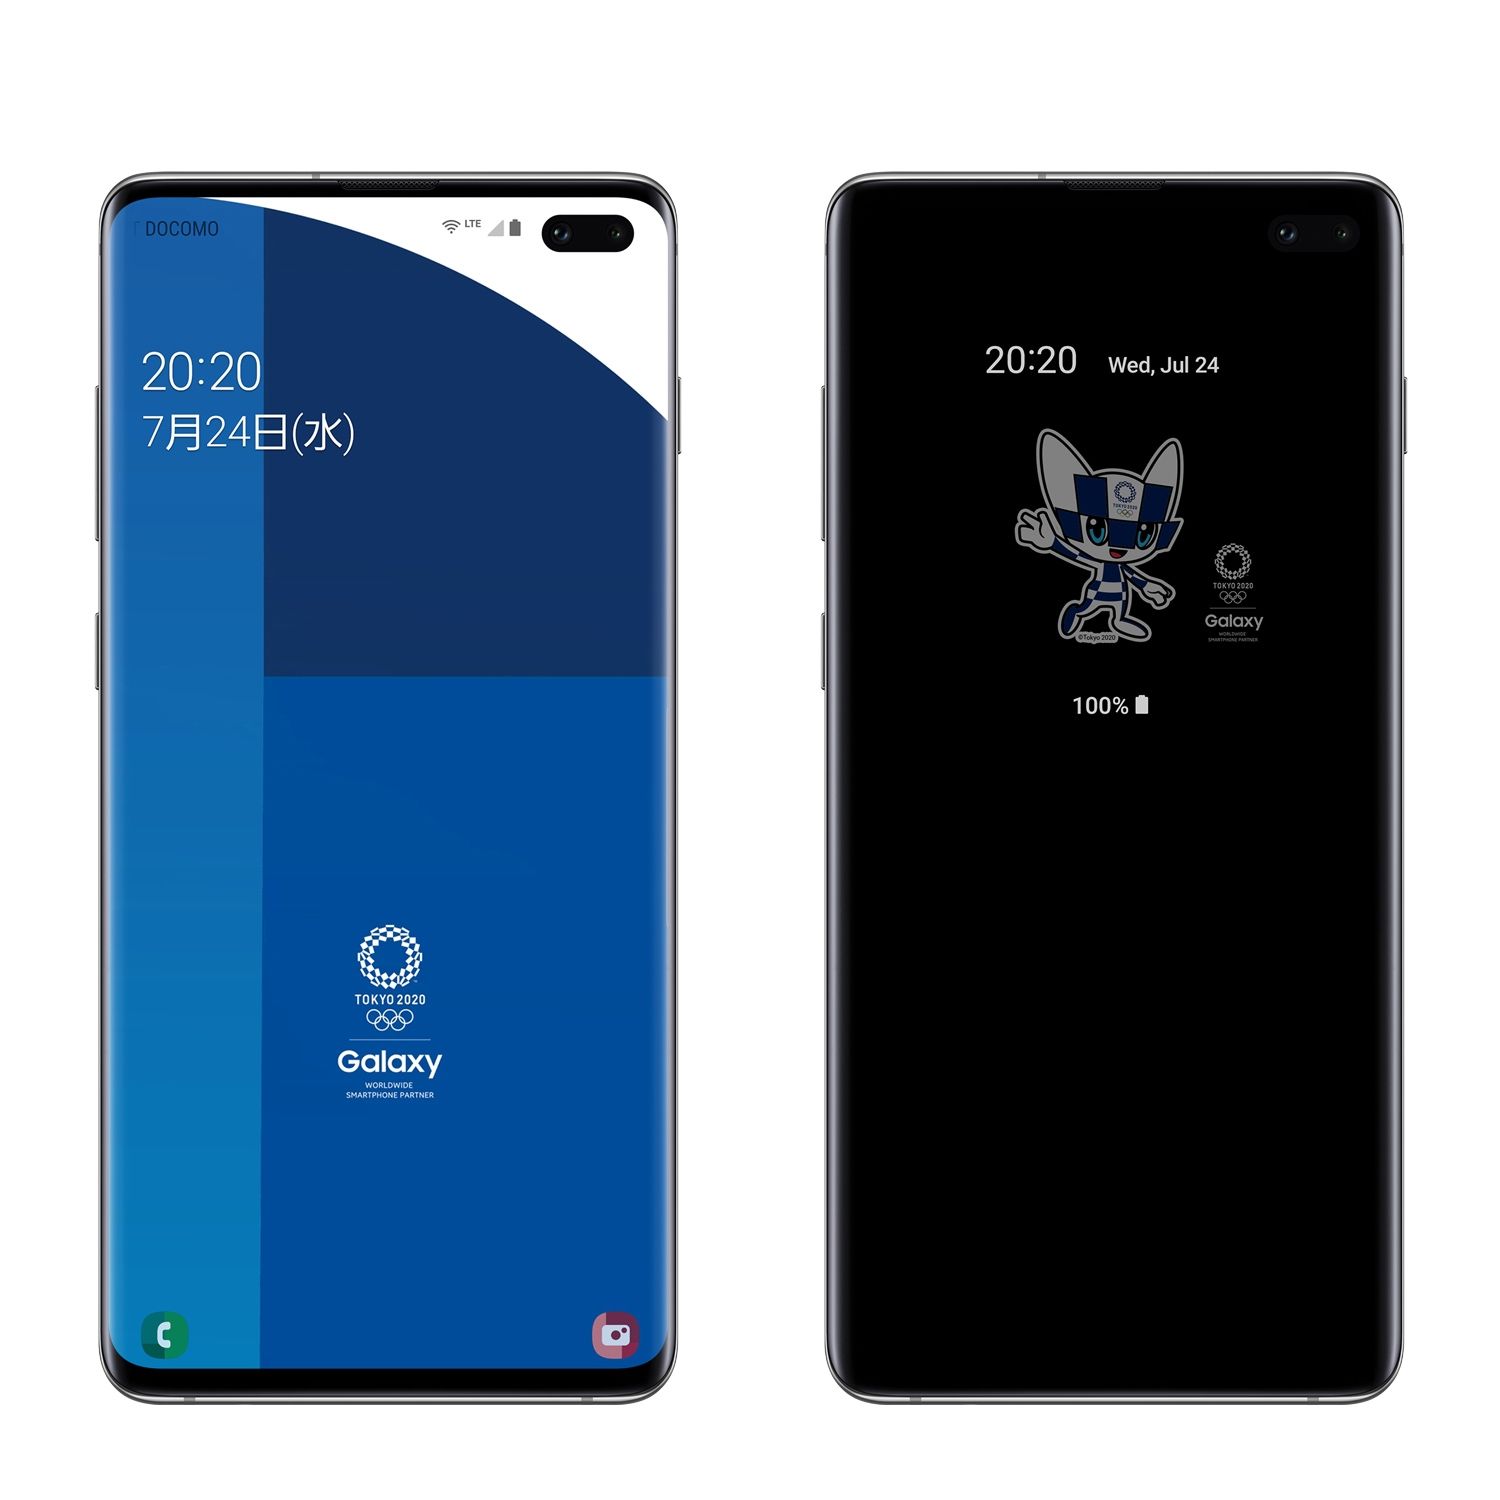 Galaxy S10+ Olympic Games Edition launches in Japan on July 24 